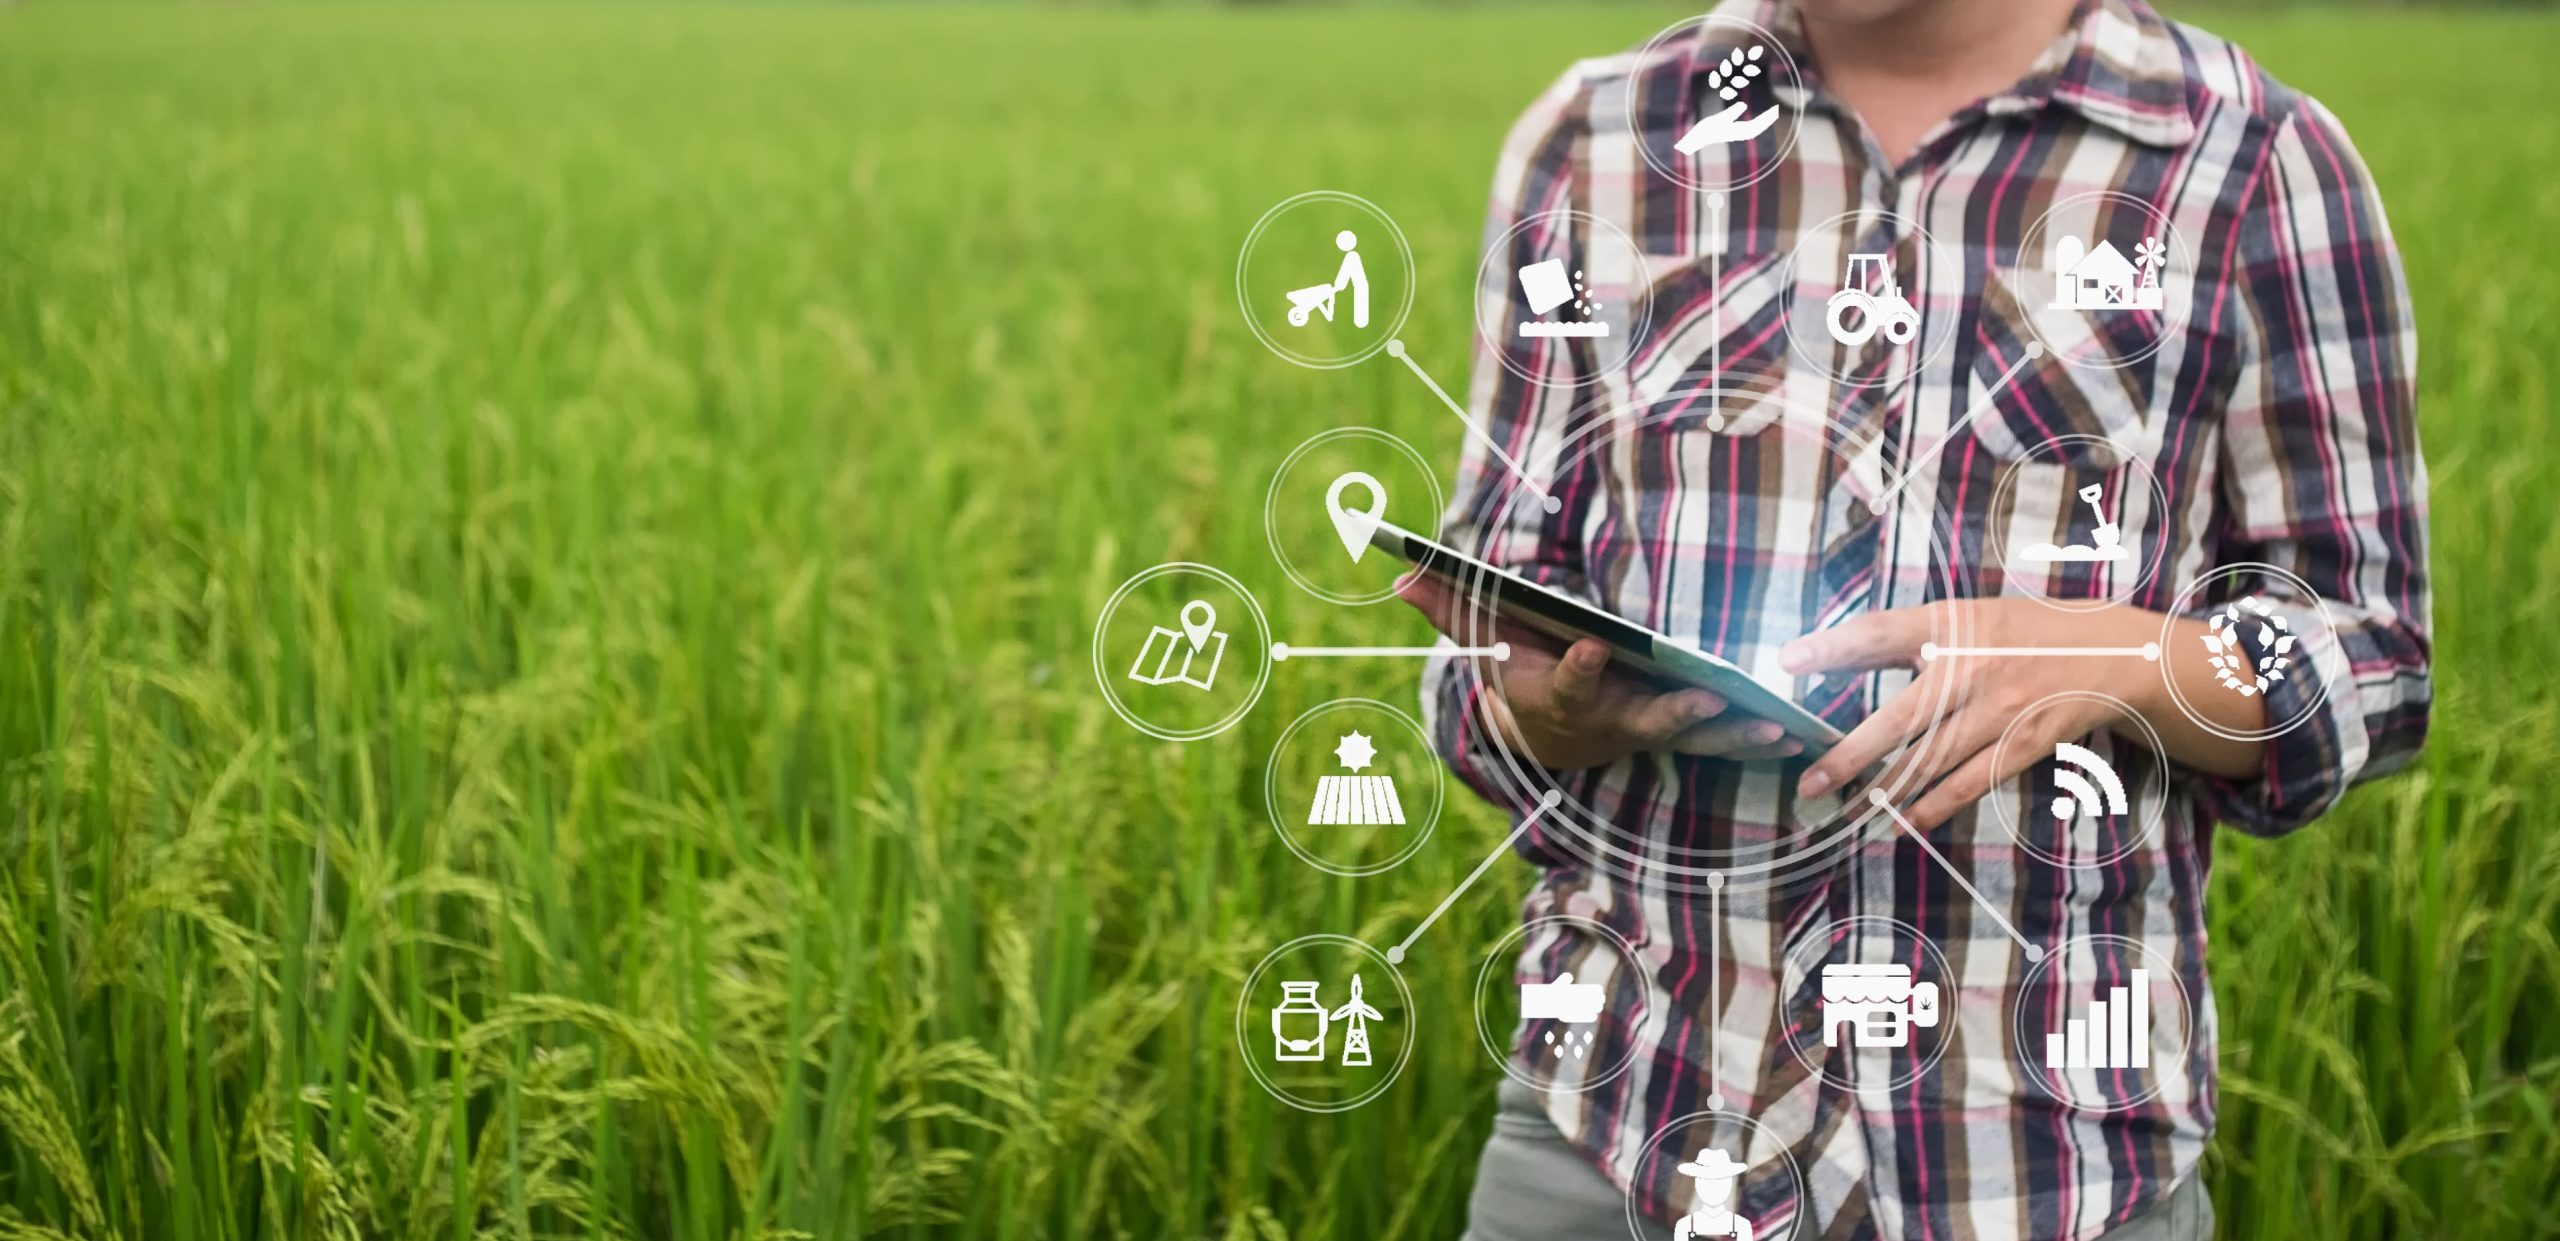 Akologic - Cloud Computing For Agriculture. Farm management software.